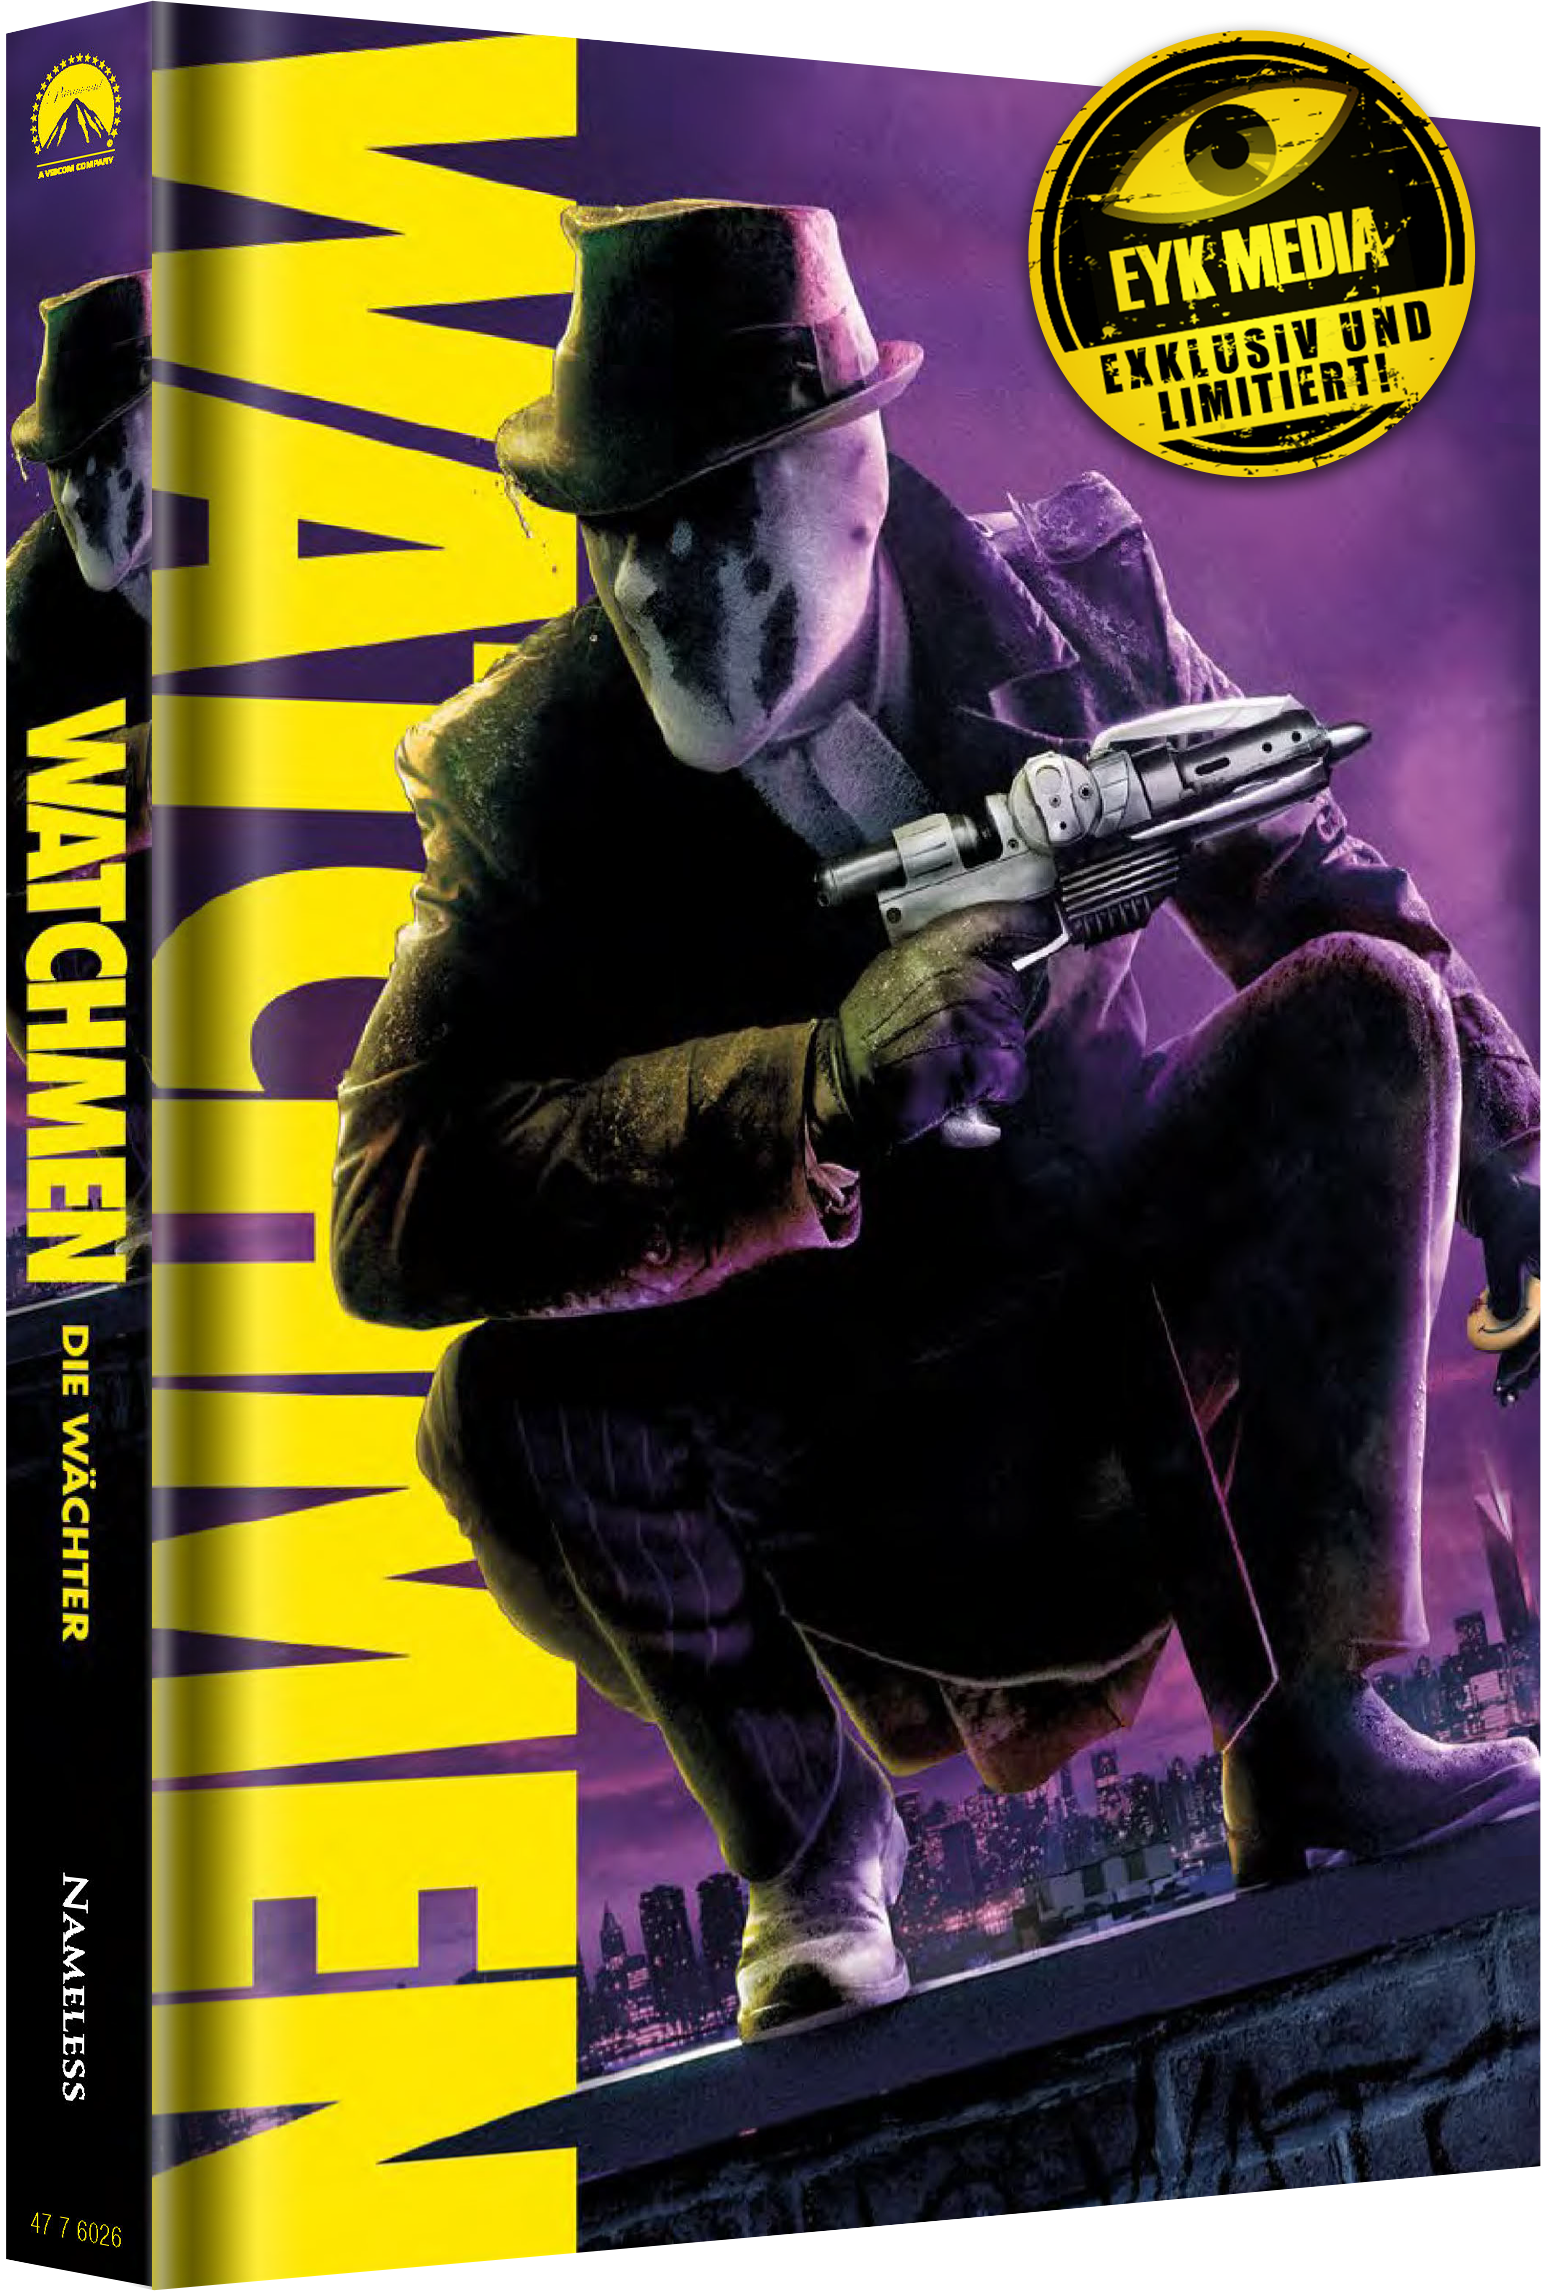 Watchmen_Cover_b_500_EYK.png